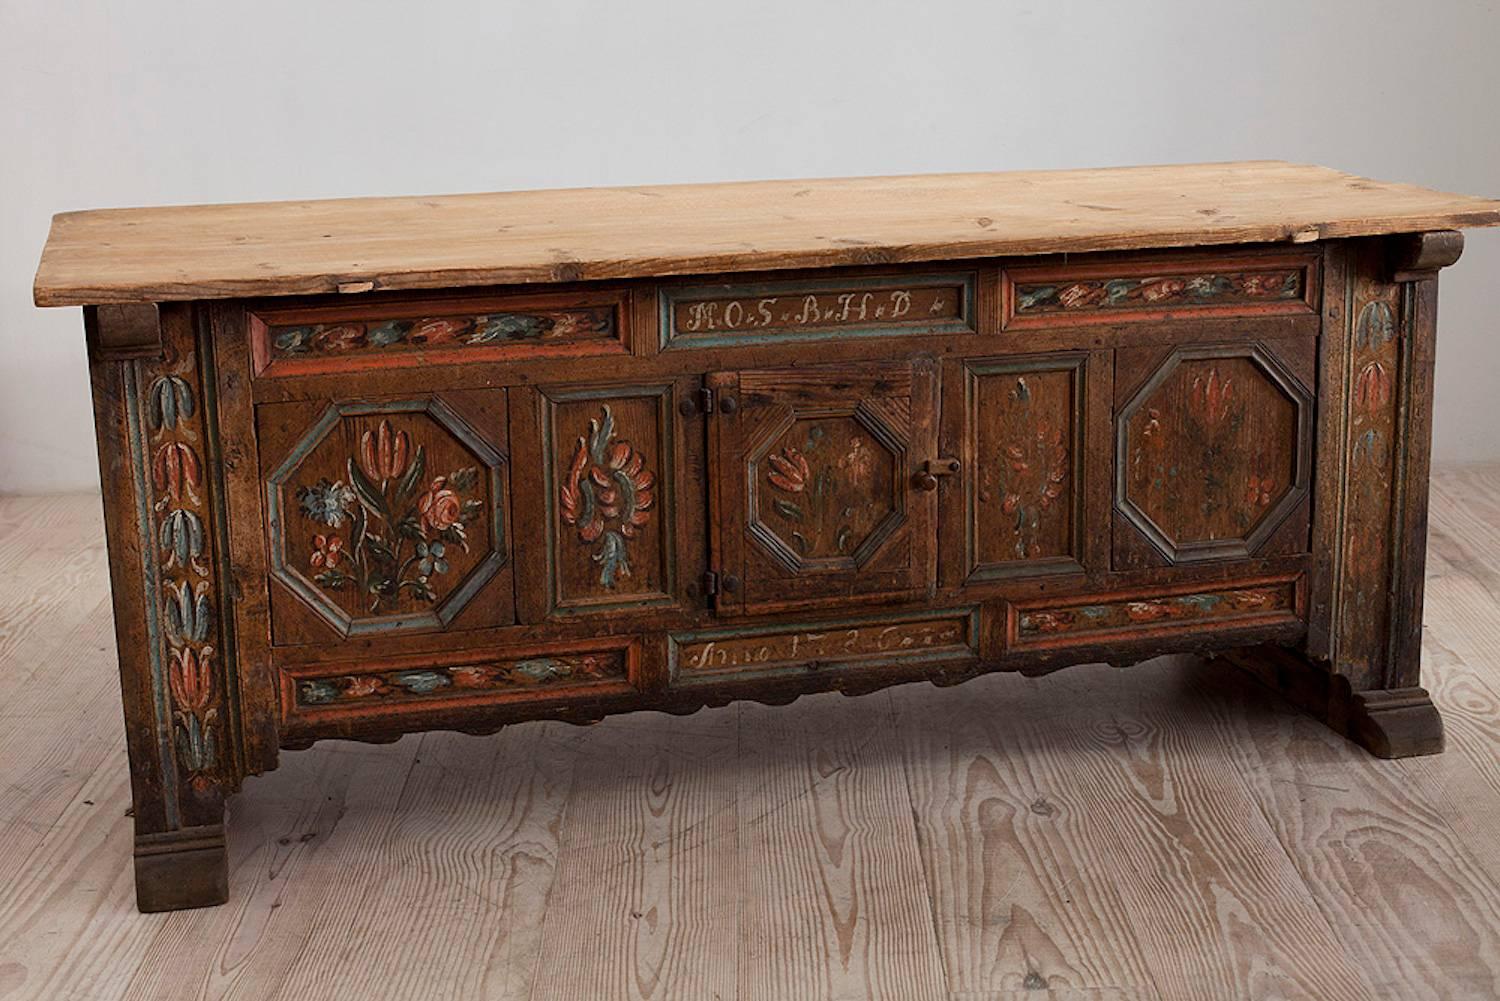 Rare Swedish Kistbord Med Dörr, 18th Century Sideboard, Inscribed and Dated 1786 4